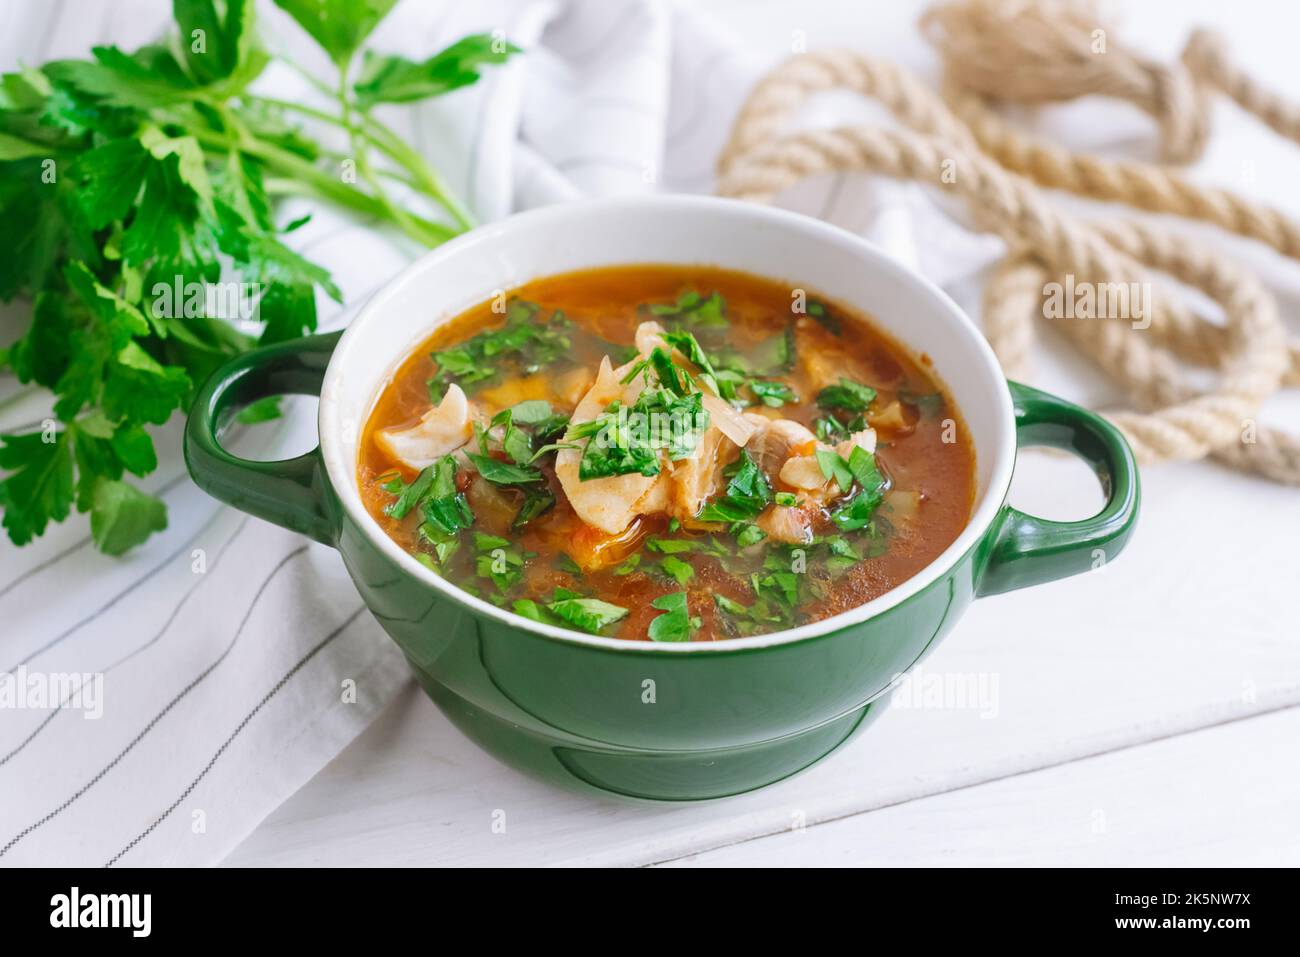 measuring temperature of fish soup during cooking in stockpot by infrared  thermometer on ceramic stove at home kitchen Stock Photo - Alamy